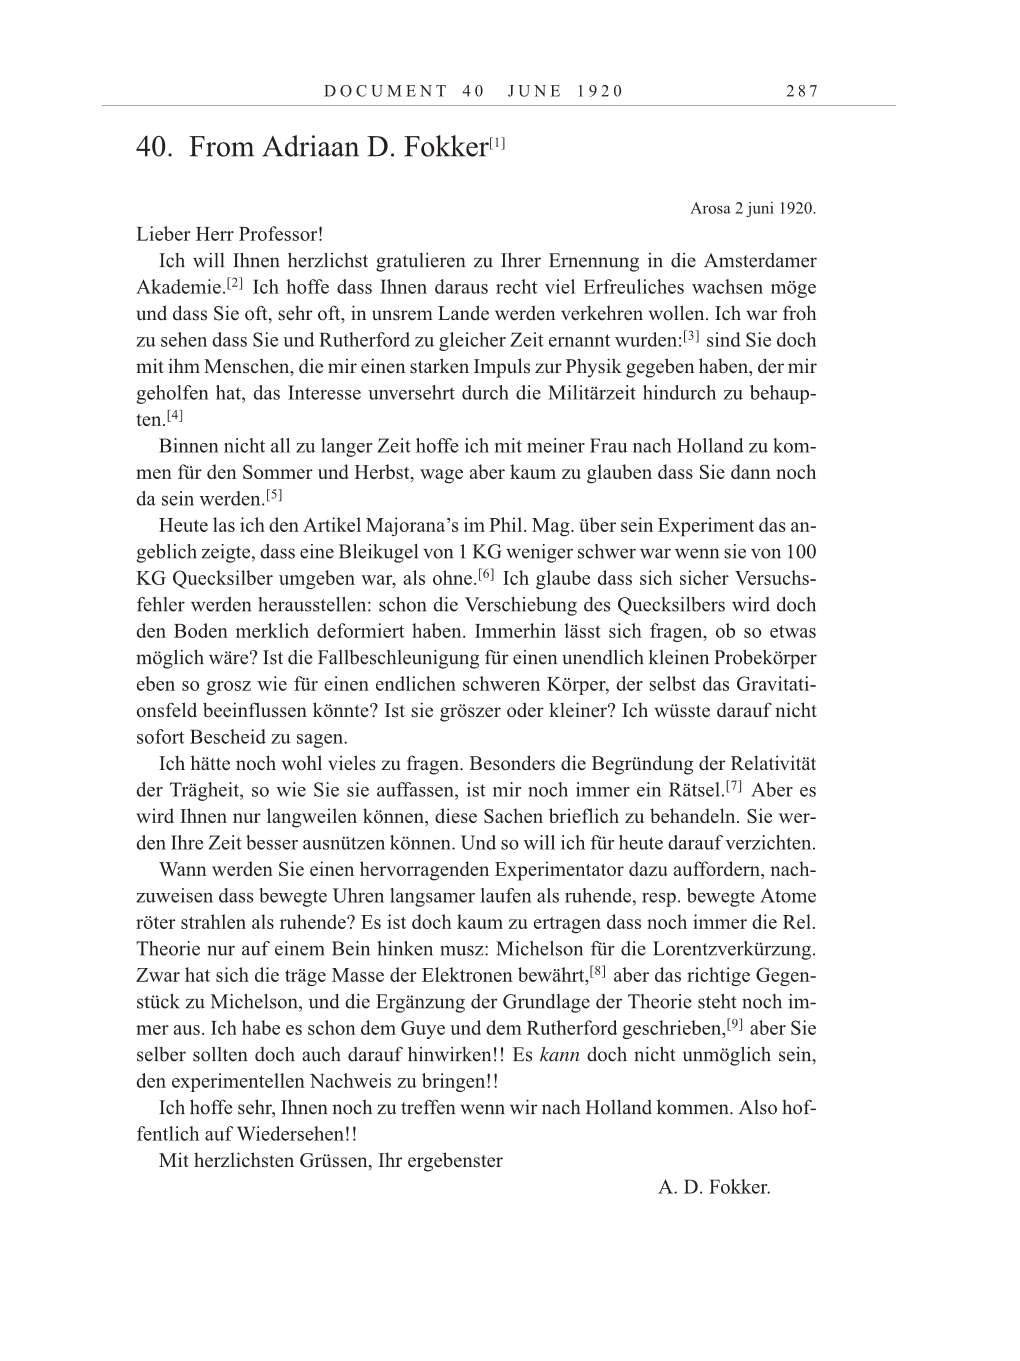 Volume 10: The Berlin Years: Correspondence May-December 1920 / Supplementary Correspondence 1909-1920 page 287